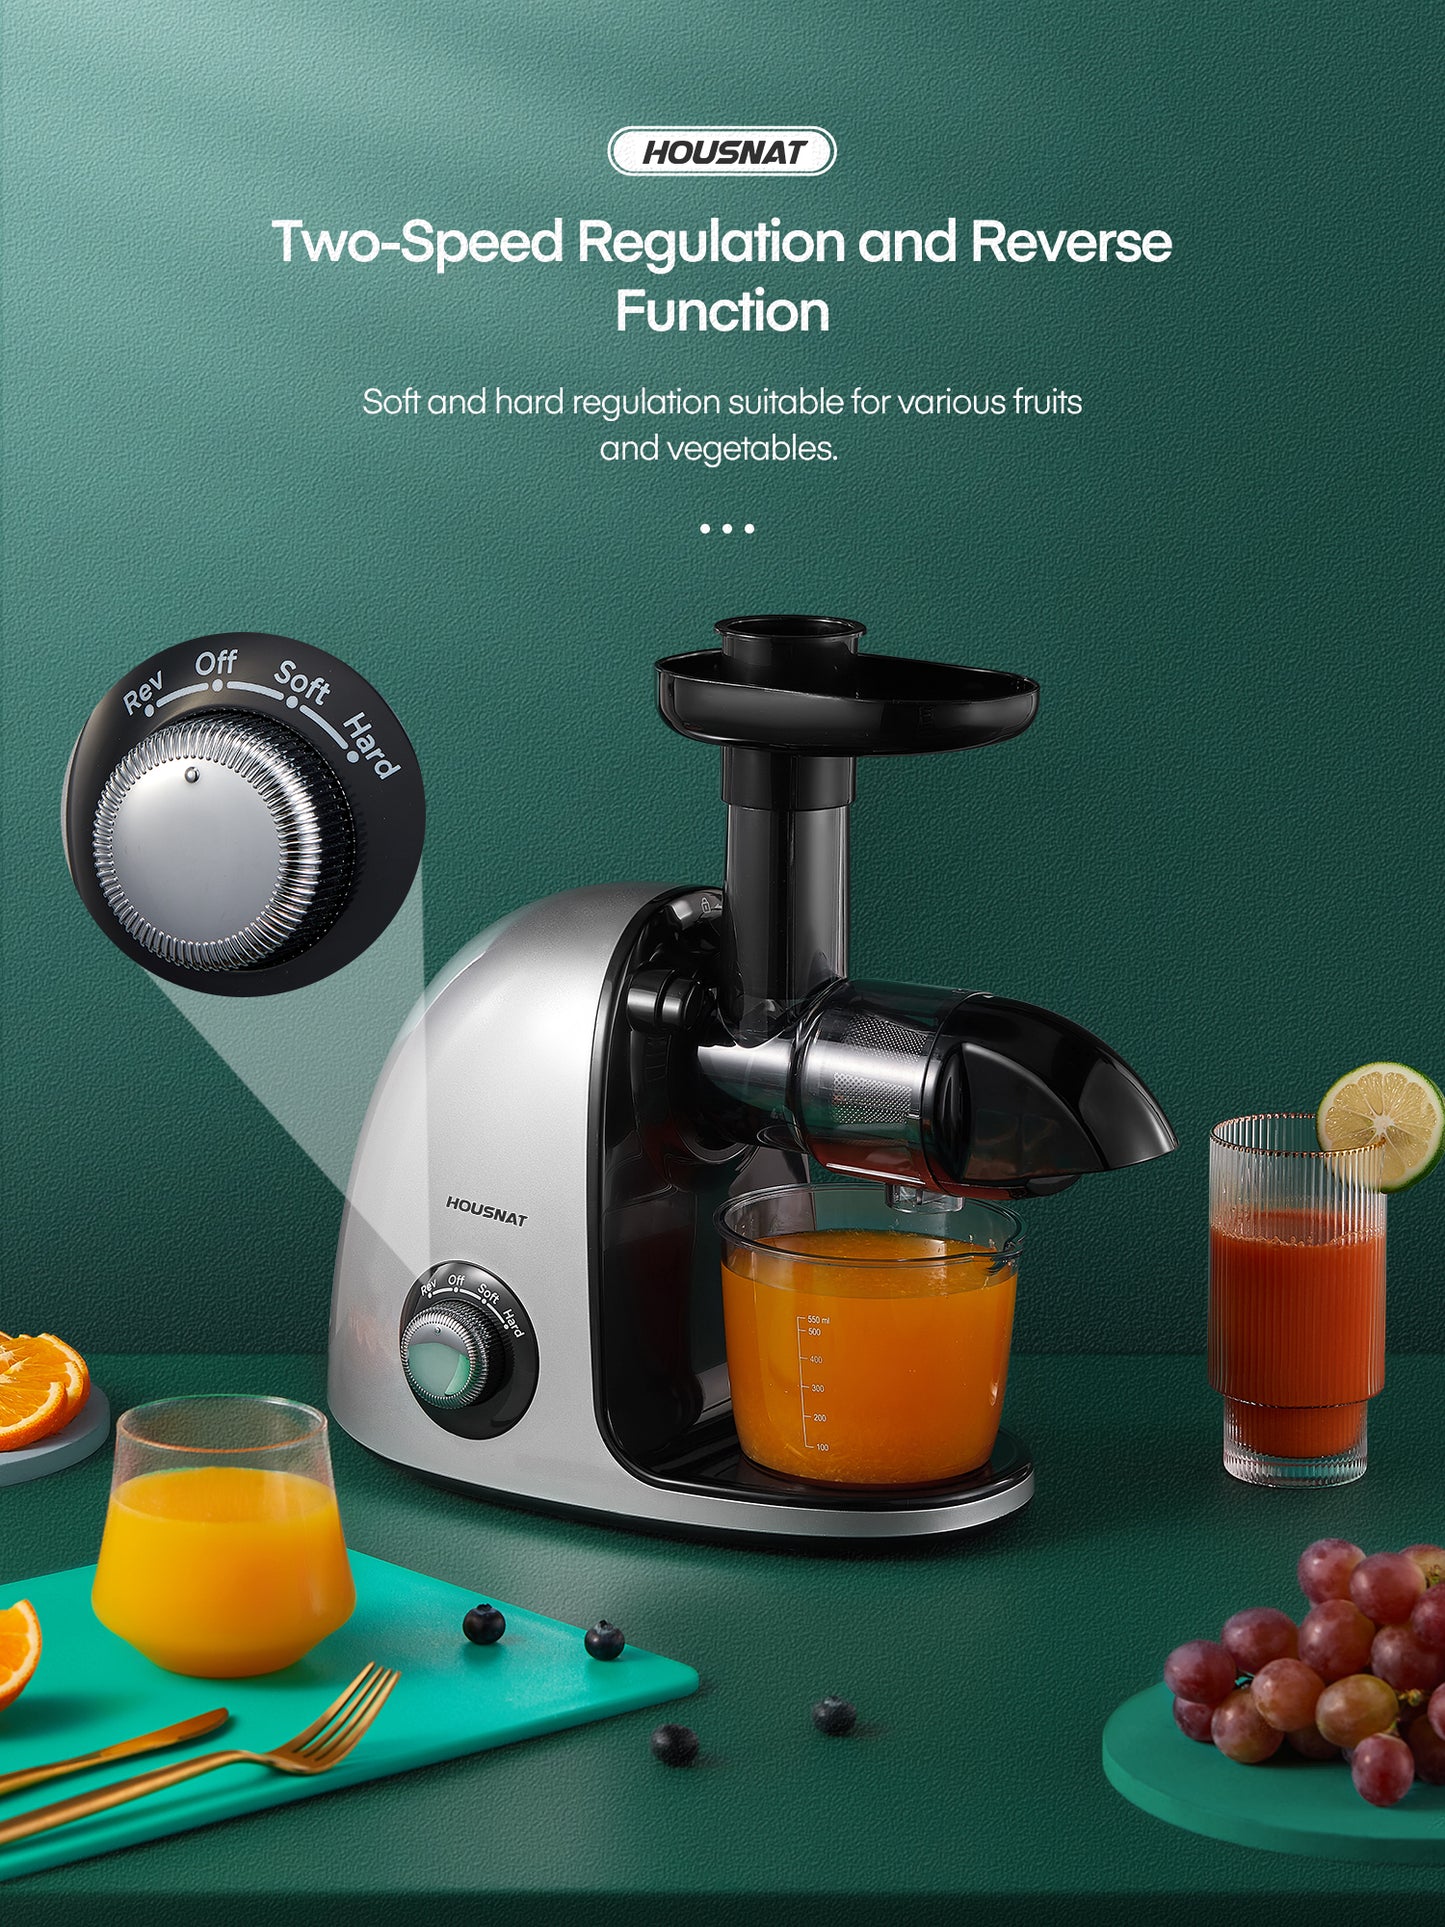 Slow Juicer Machine for Fruits & Vegetables, HOUSNAT Slow Masticating Juicer with Quiet Motor & Reverse Function, Easy to Clean, Cold Press Juice Extractor with 2-Speed Modes, Recipes (Silver Knight)